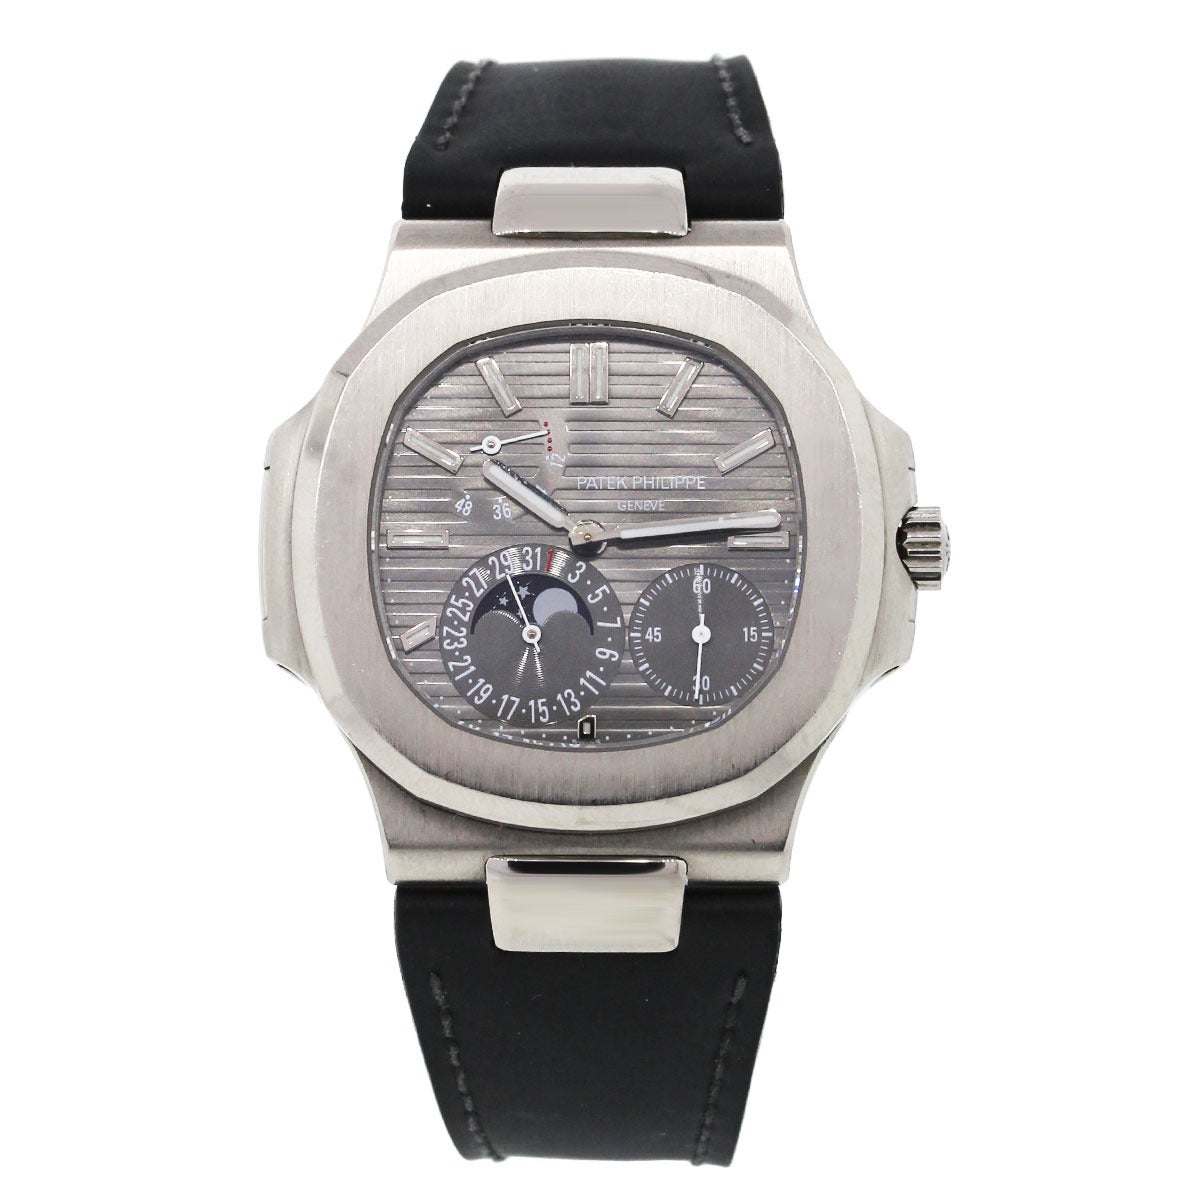 Brand: Patek Philippe
Model: Nautilus
Reference: 5712G
Case Material: 18k White Gold
Movement: Automatic, self-winding caliber 240 PS IRM C LU movement
Case Measurement: 40mm
Dial: Slate gray dial, gold applied hour markers with luminescent